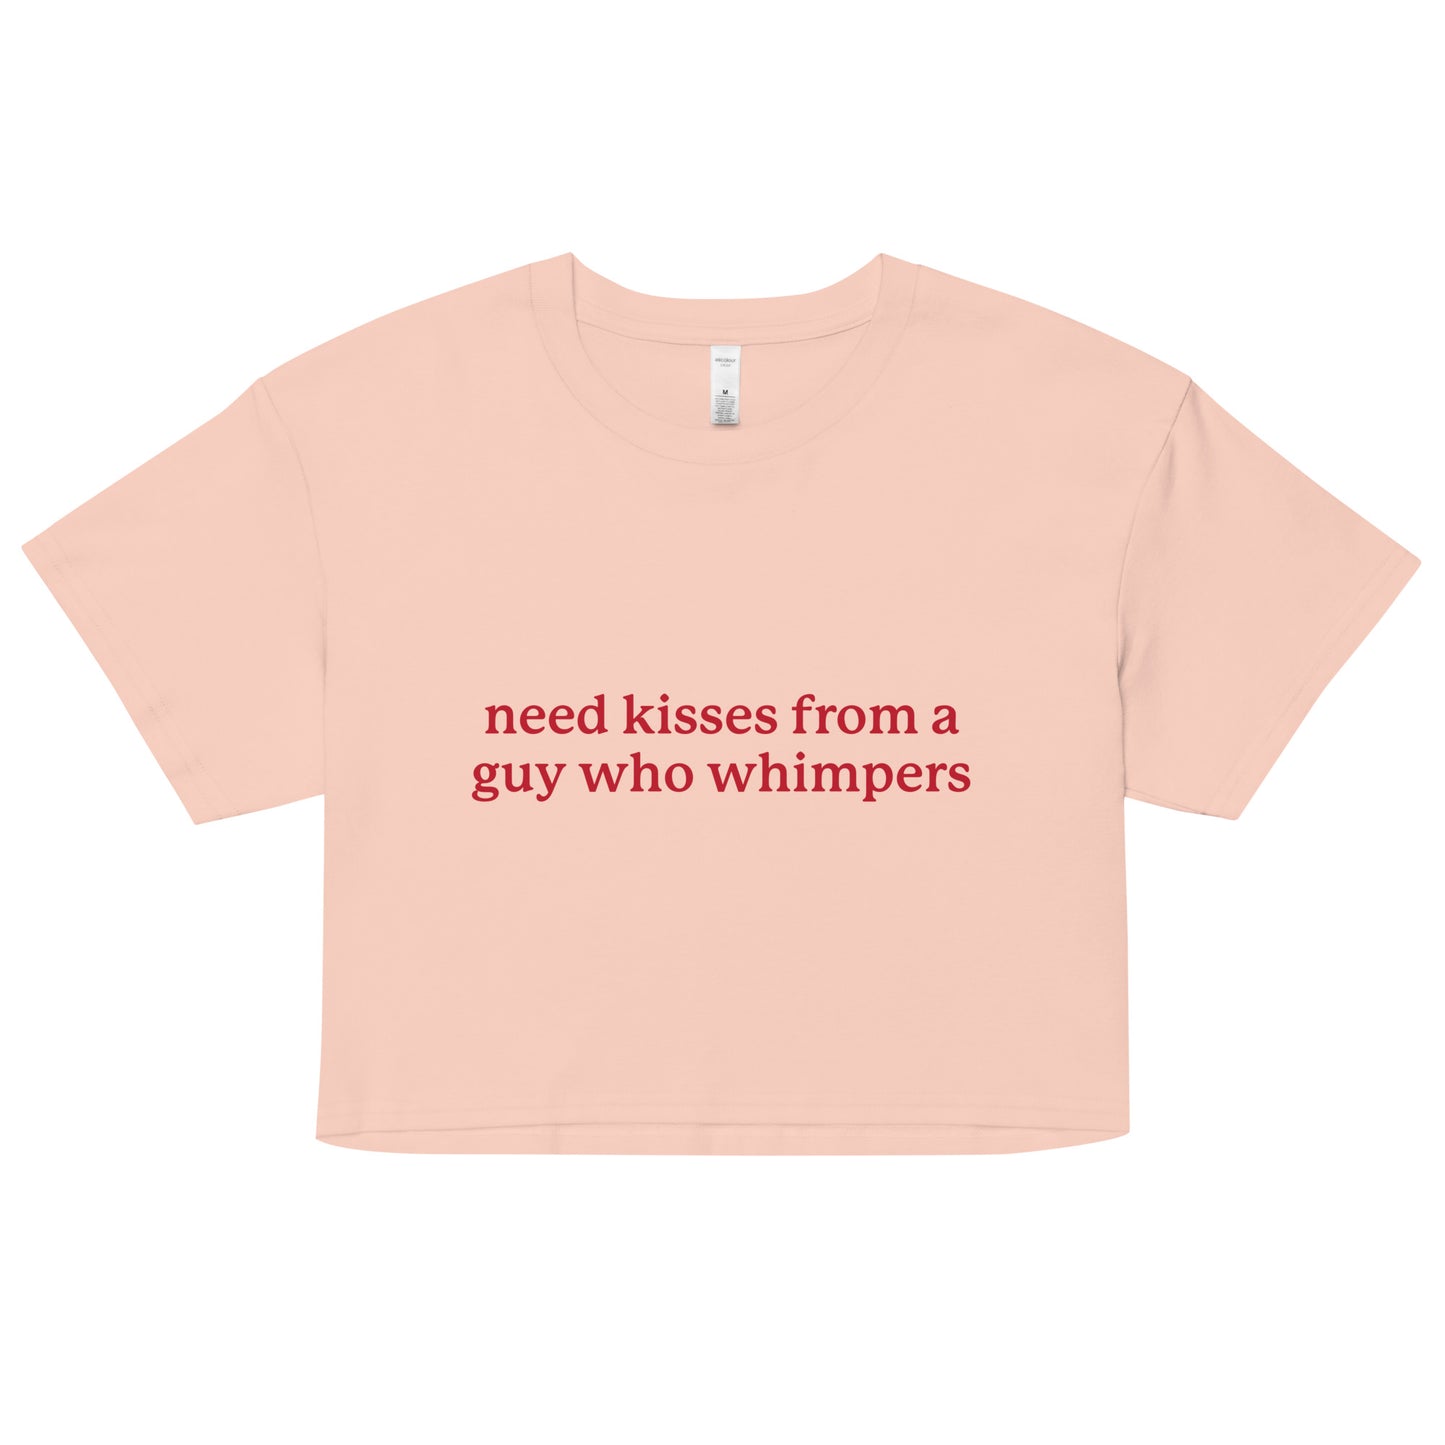 Need Kisses From a Guy Who Whimpers crop top